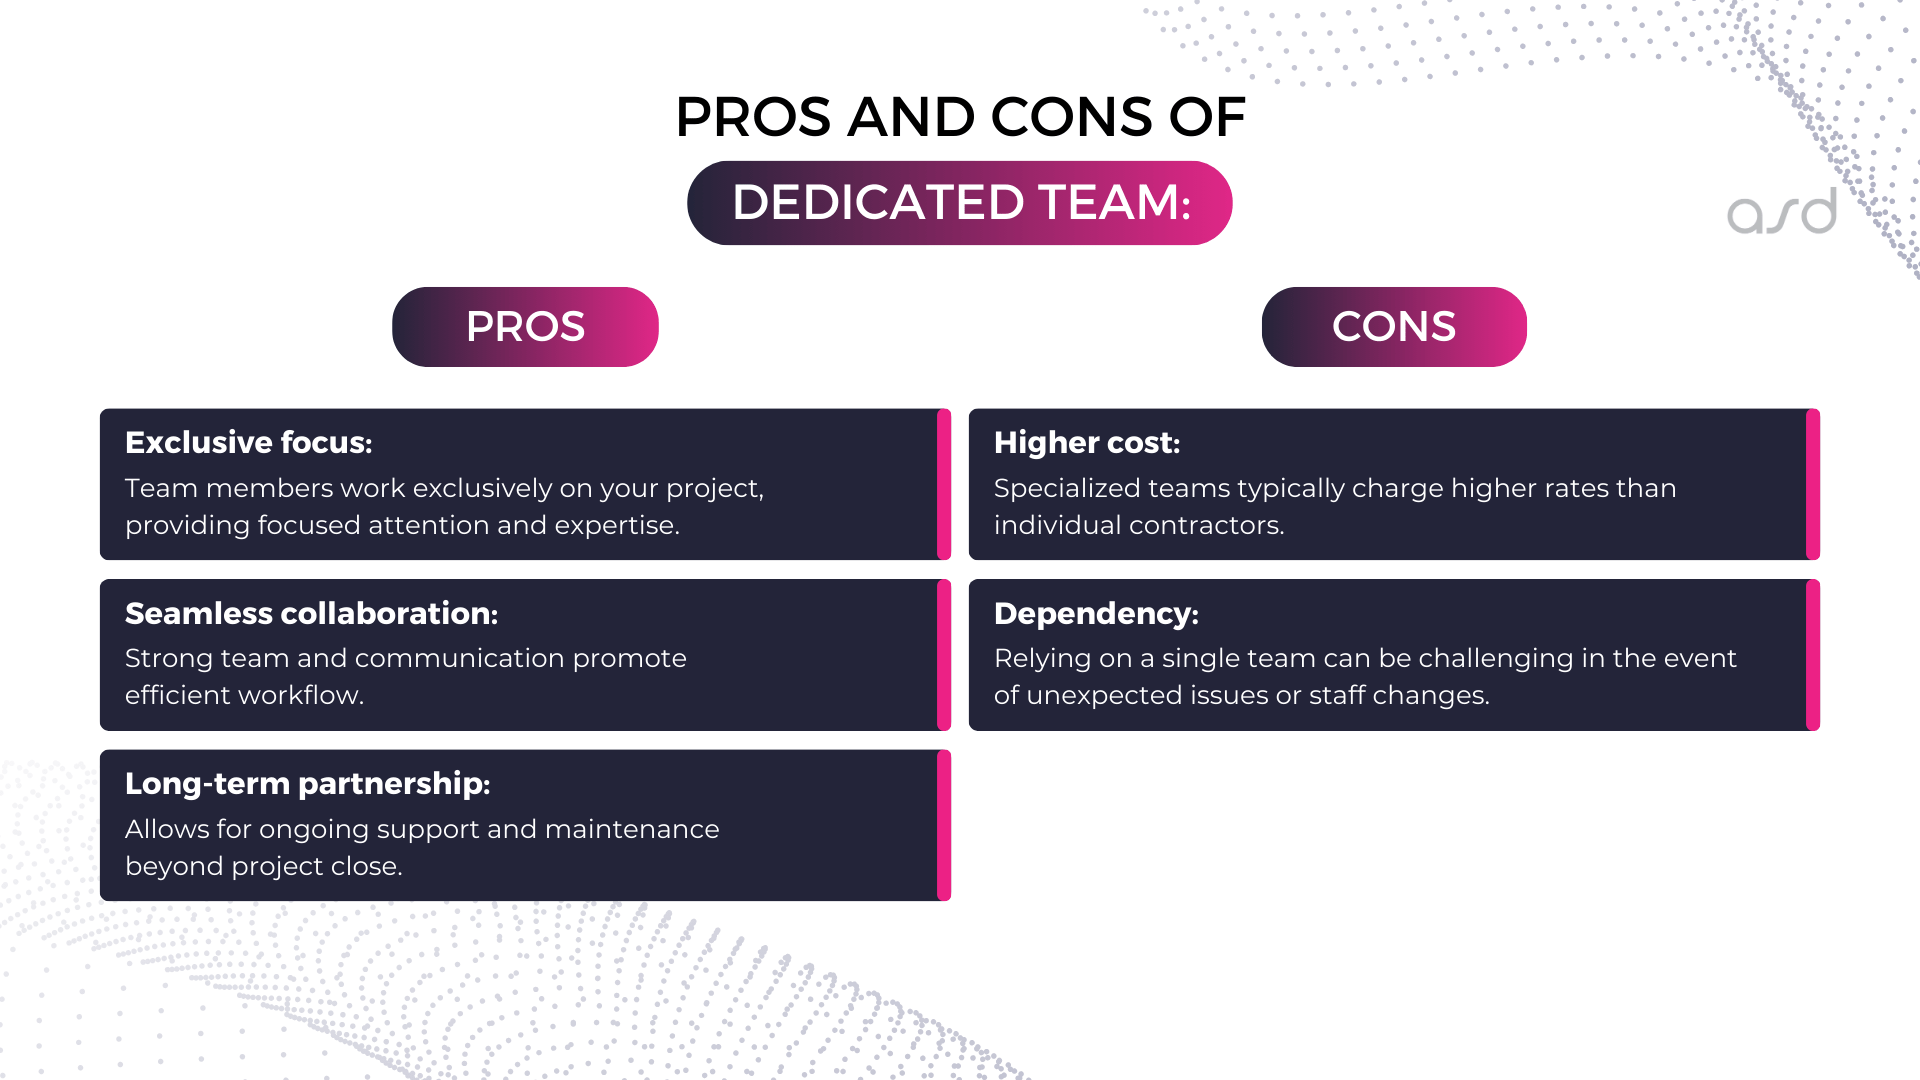 Pros and cons of dedicated team